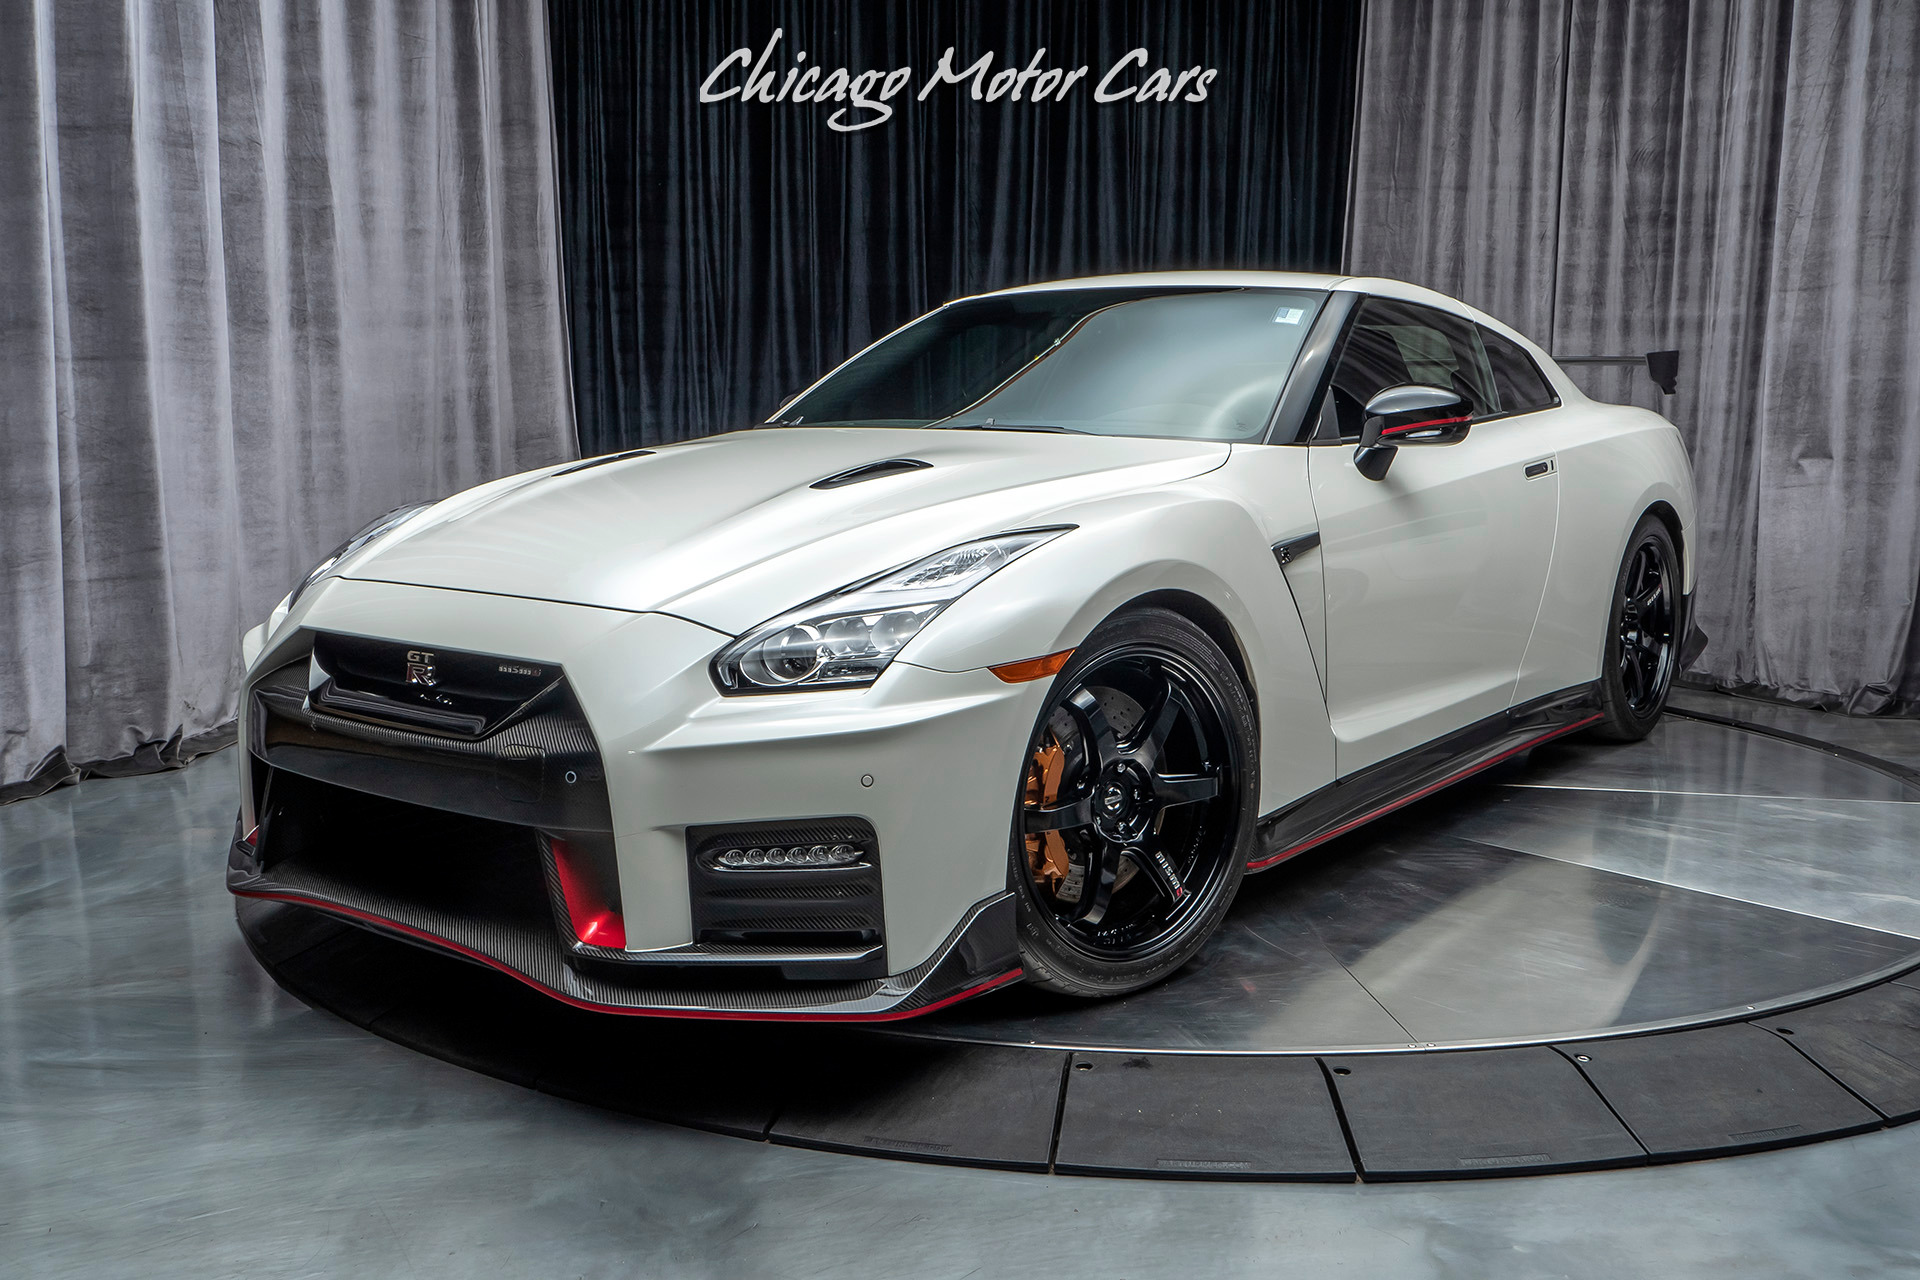 Used-2017-Nissan-GT-R-Nismo-Coupe-UPGRADES-800HP